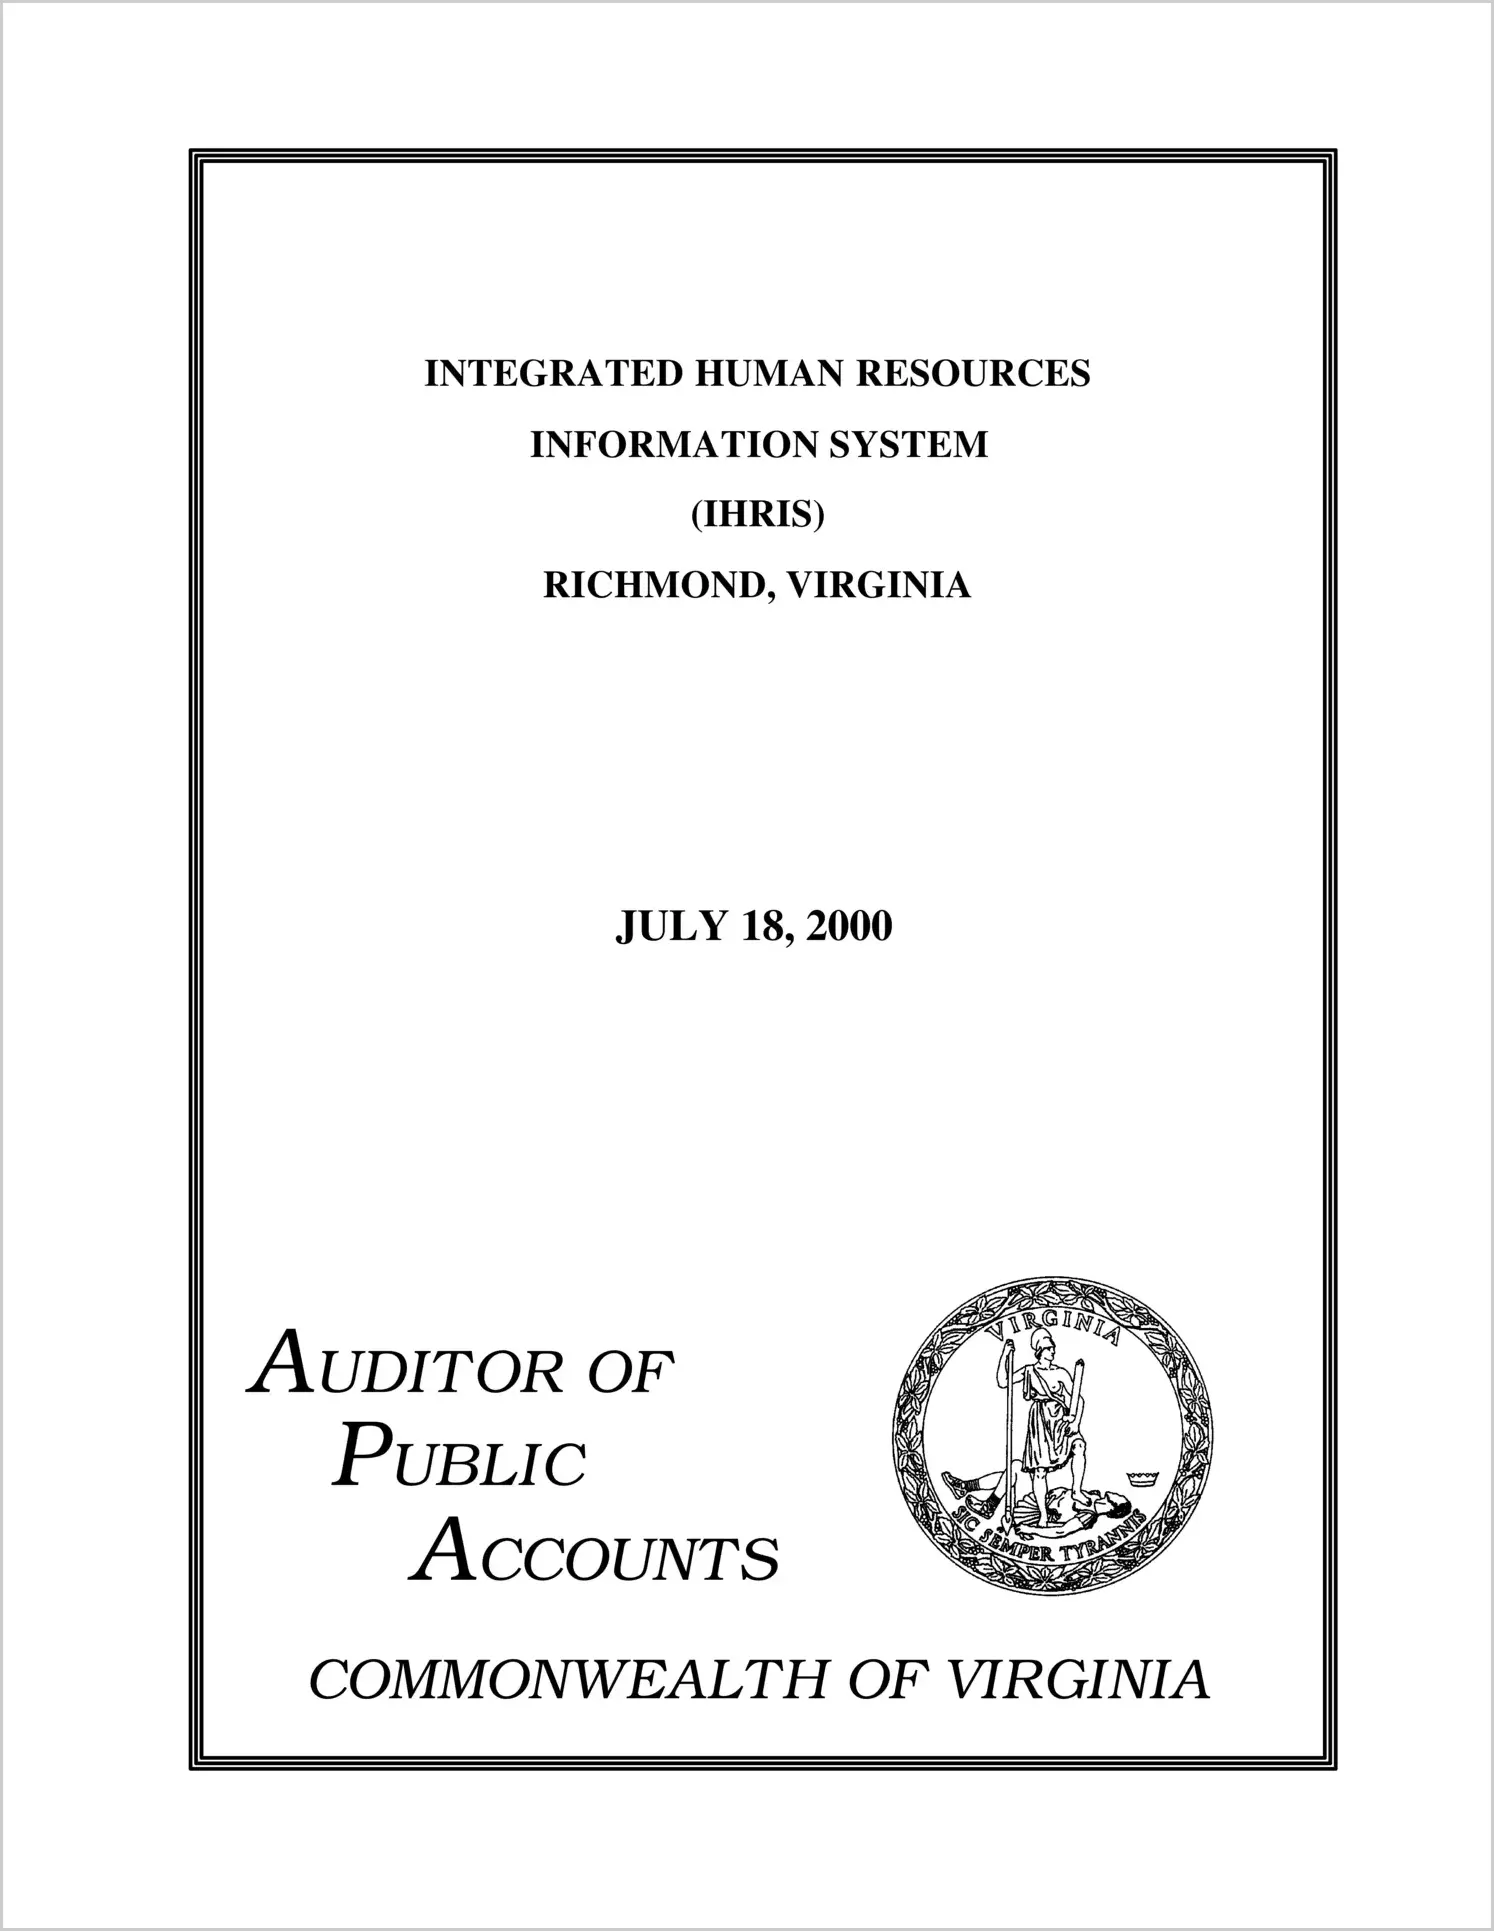 Special ReportIntegrated Human Resources Information System (IHRIS)(Report Date: 7/18/2000)